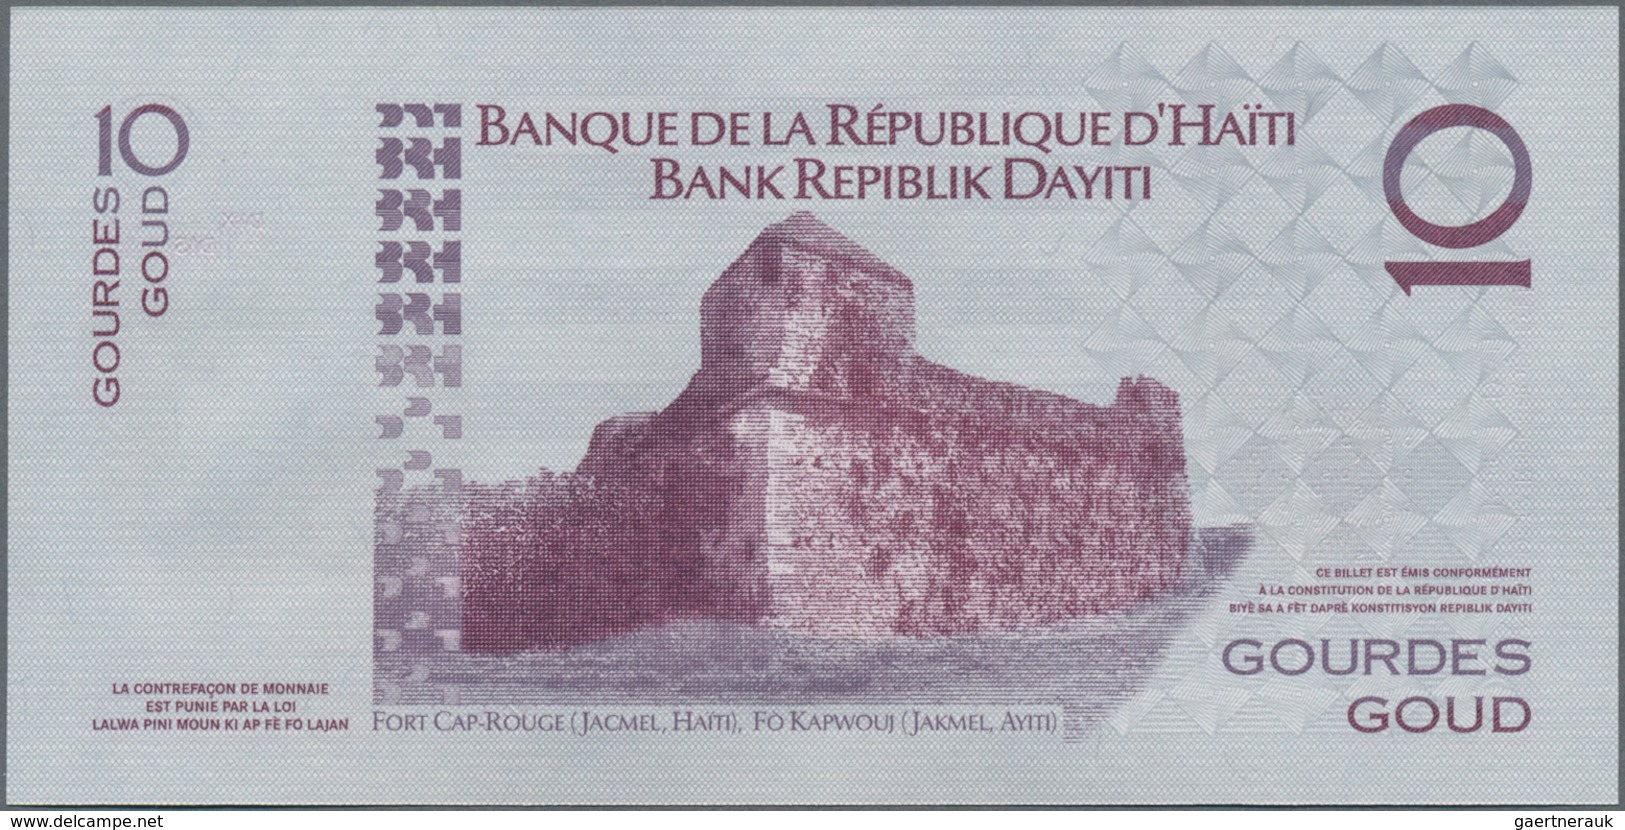 Haiti: Huge lot with 960 banknotes containing 150x 1 Gourde P.259, 60x 2 Gourdes P.260, 50x 5 Gourde